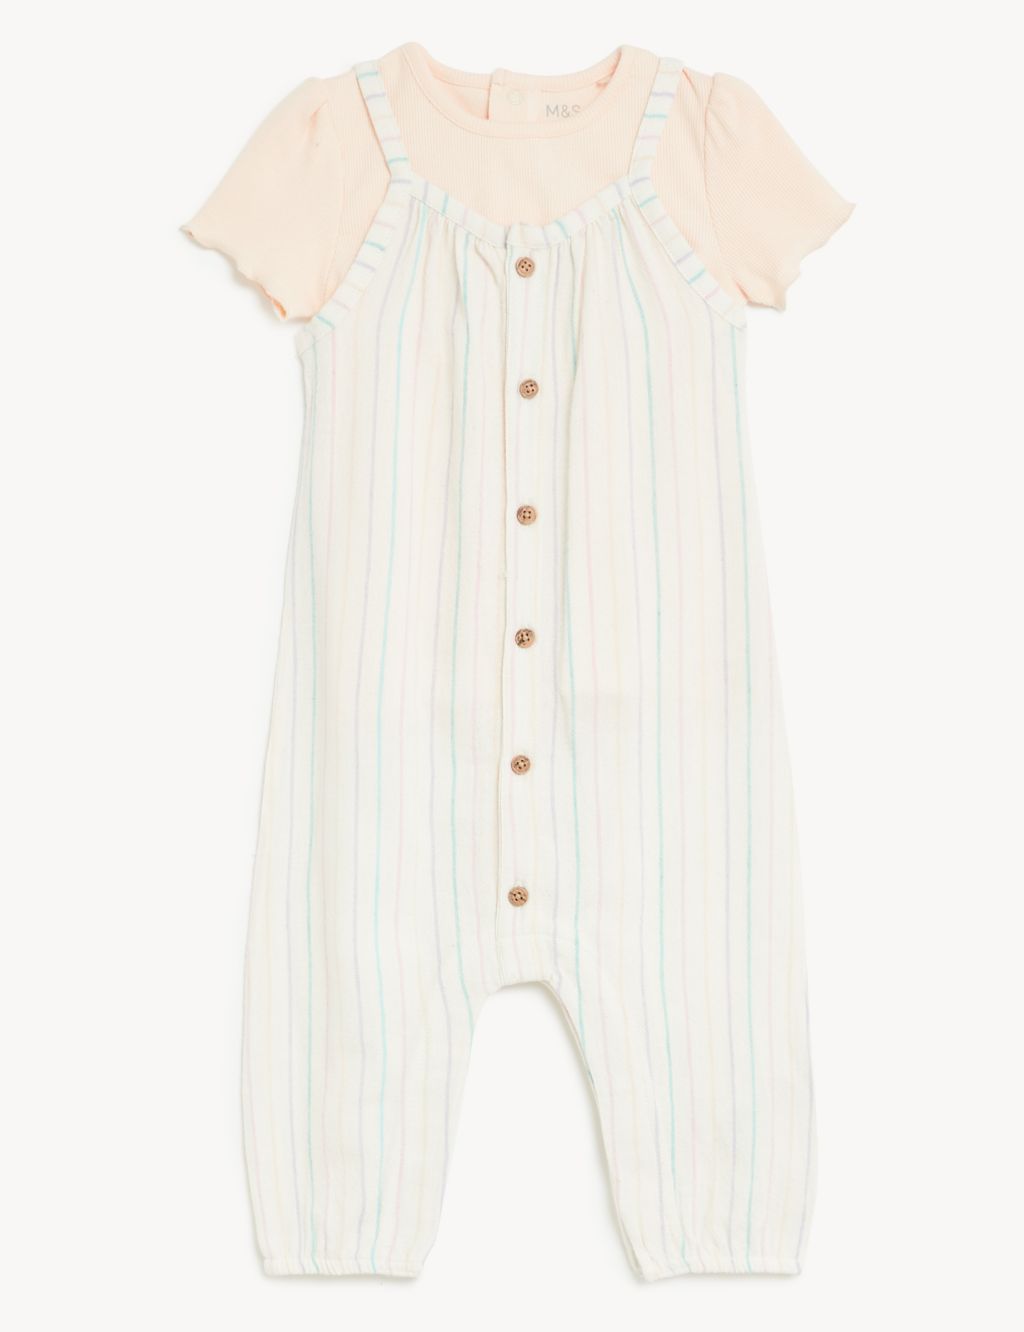 2pc Cotton Rich Striped Romper Outfit (0-3 Yrs) image 1